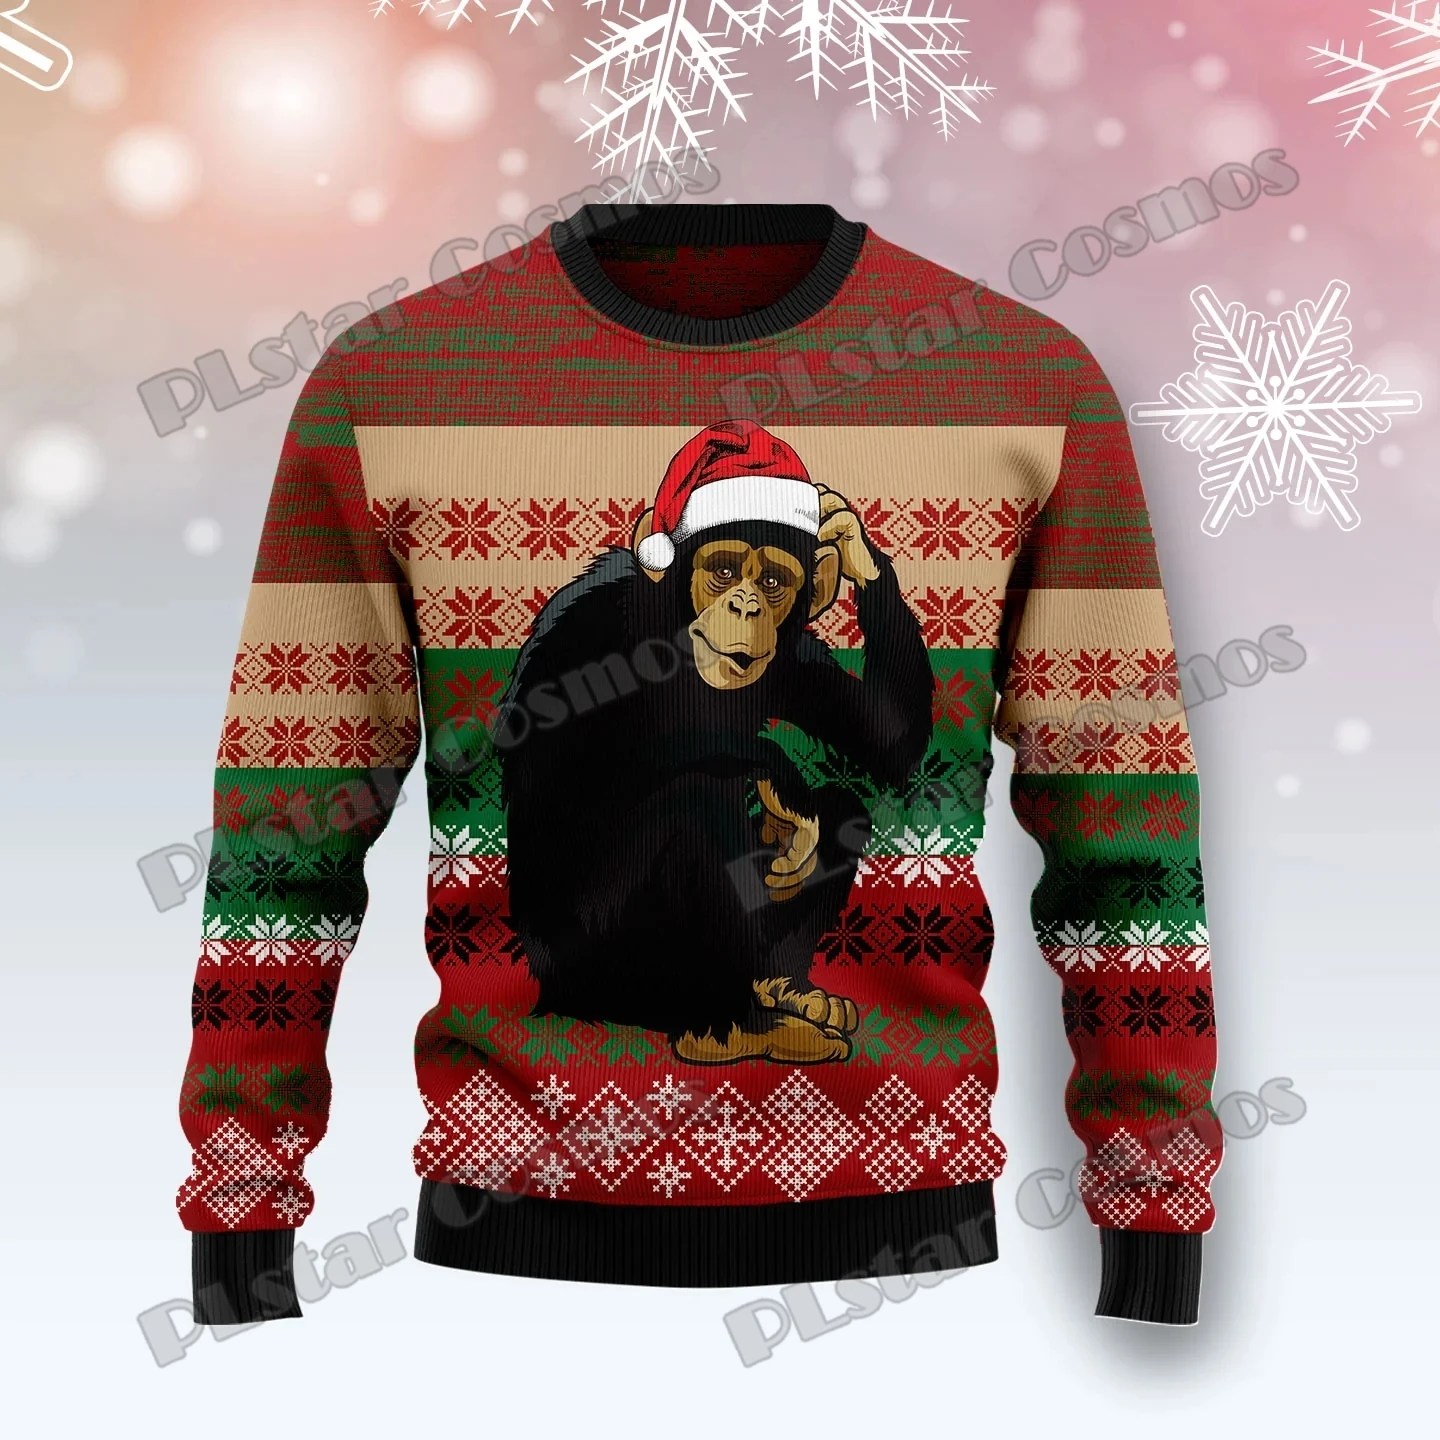 PLstar Cosmos Chimpanzee Christmas 3D Printed Fashion Men's Ugly Christmas Sweater Winter Unisex Casual Knitwear Pullover MYY33